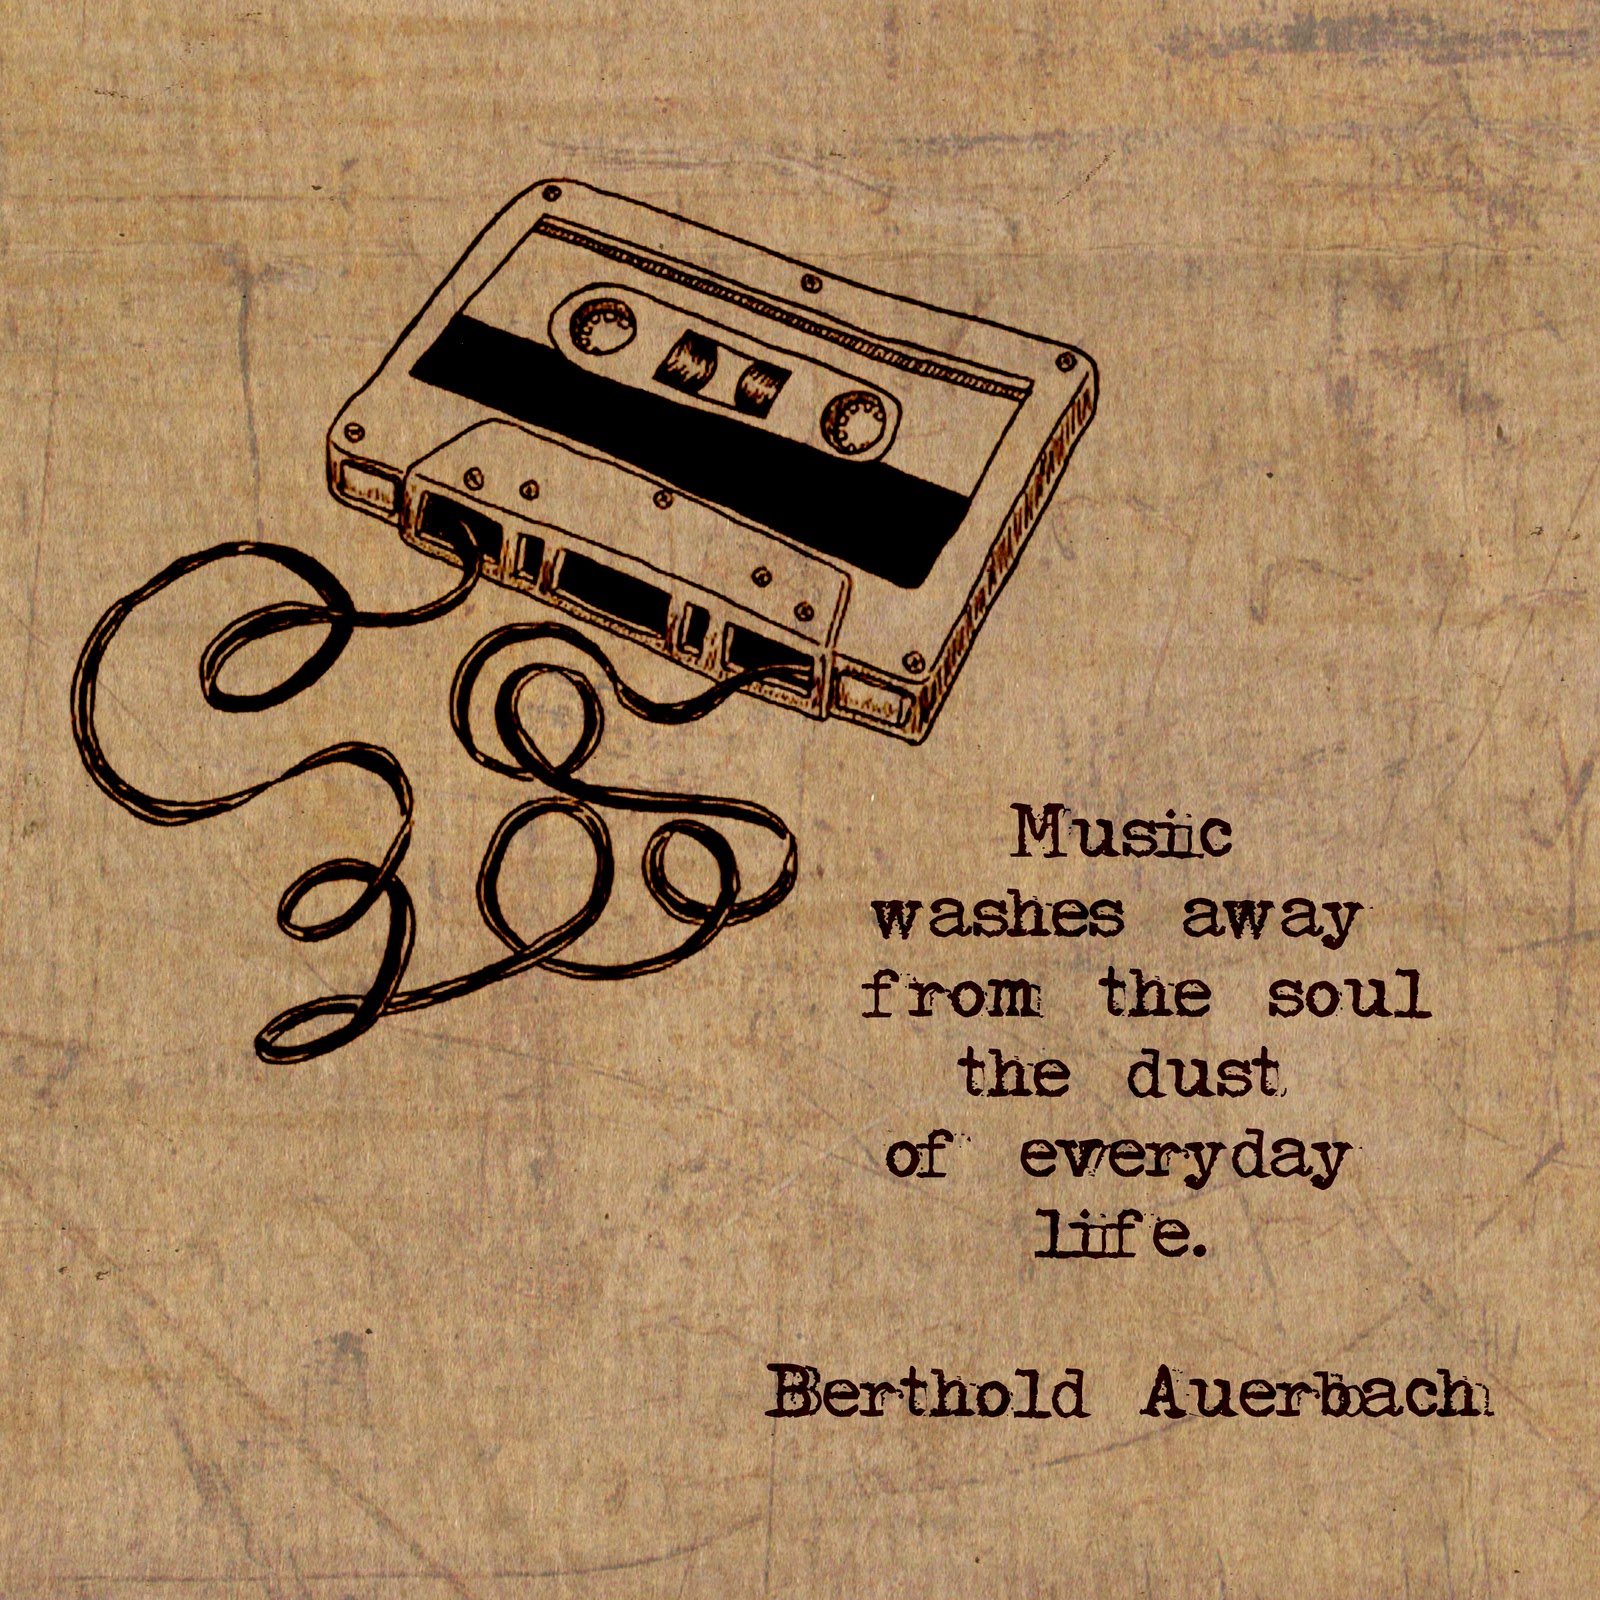 Music washes away from the soul the dust of everyday life. Berthold Auerbach